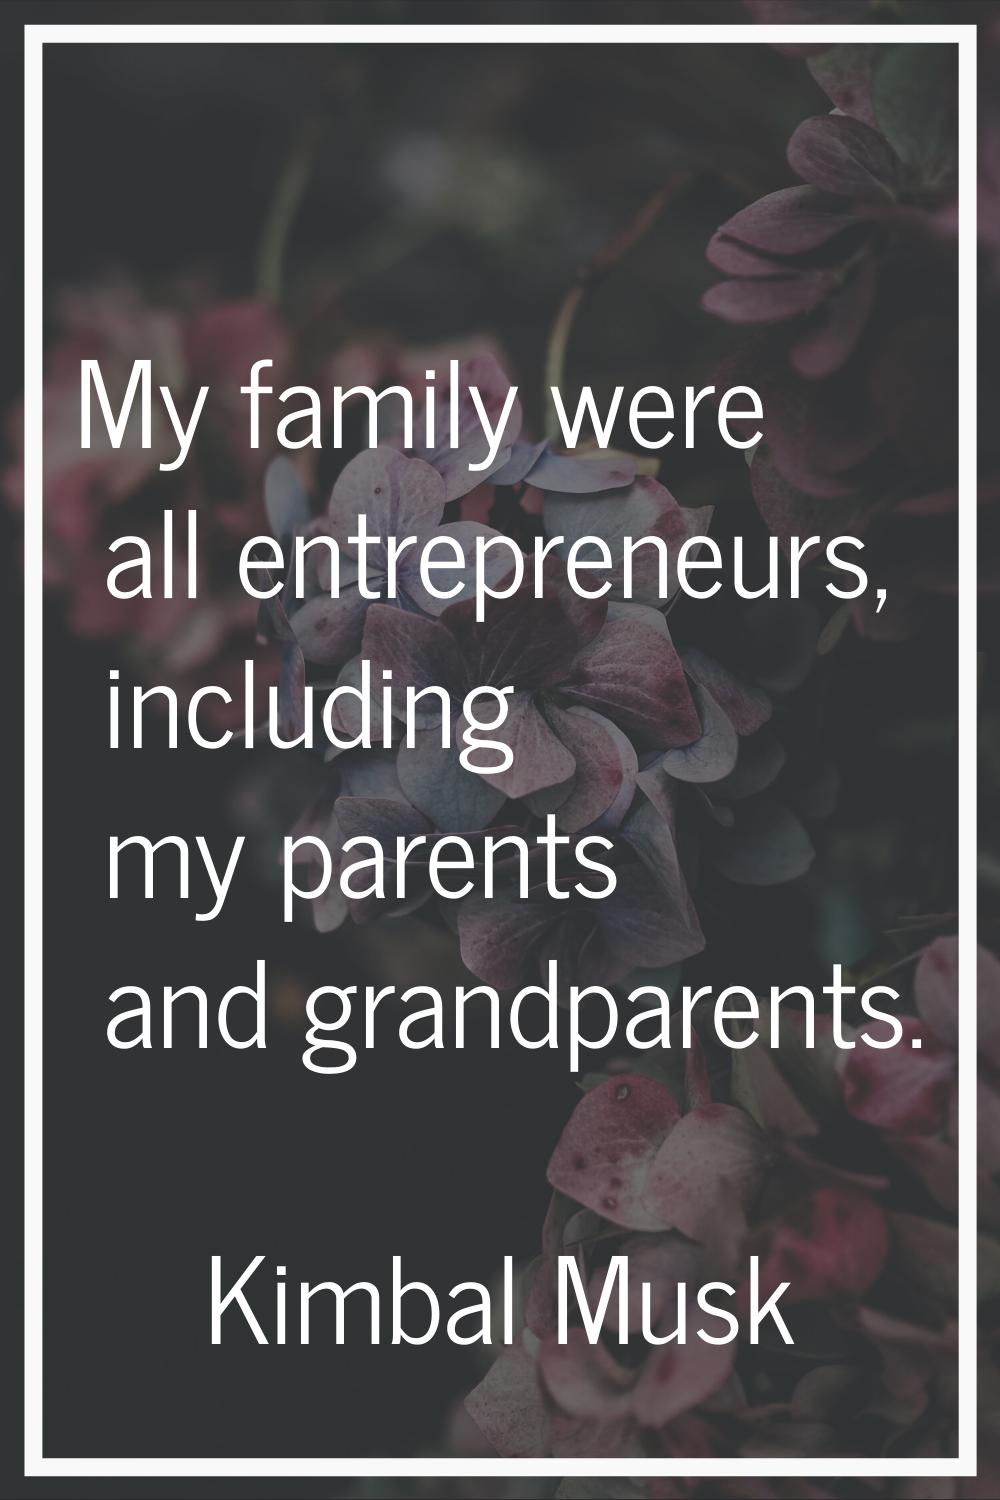 My family were all entrepreneurs, including my parents and grandparents.